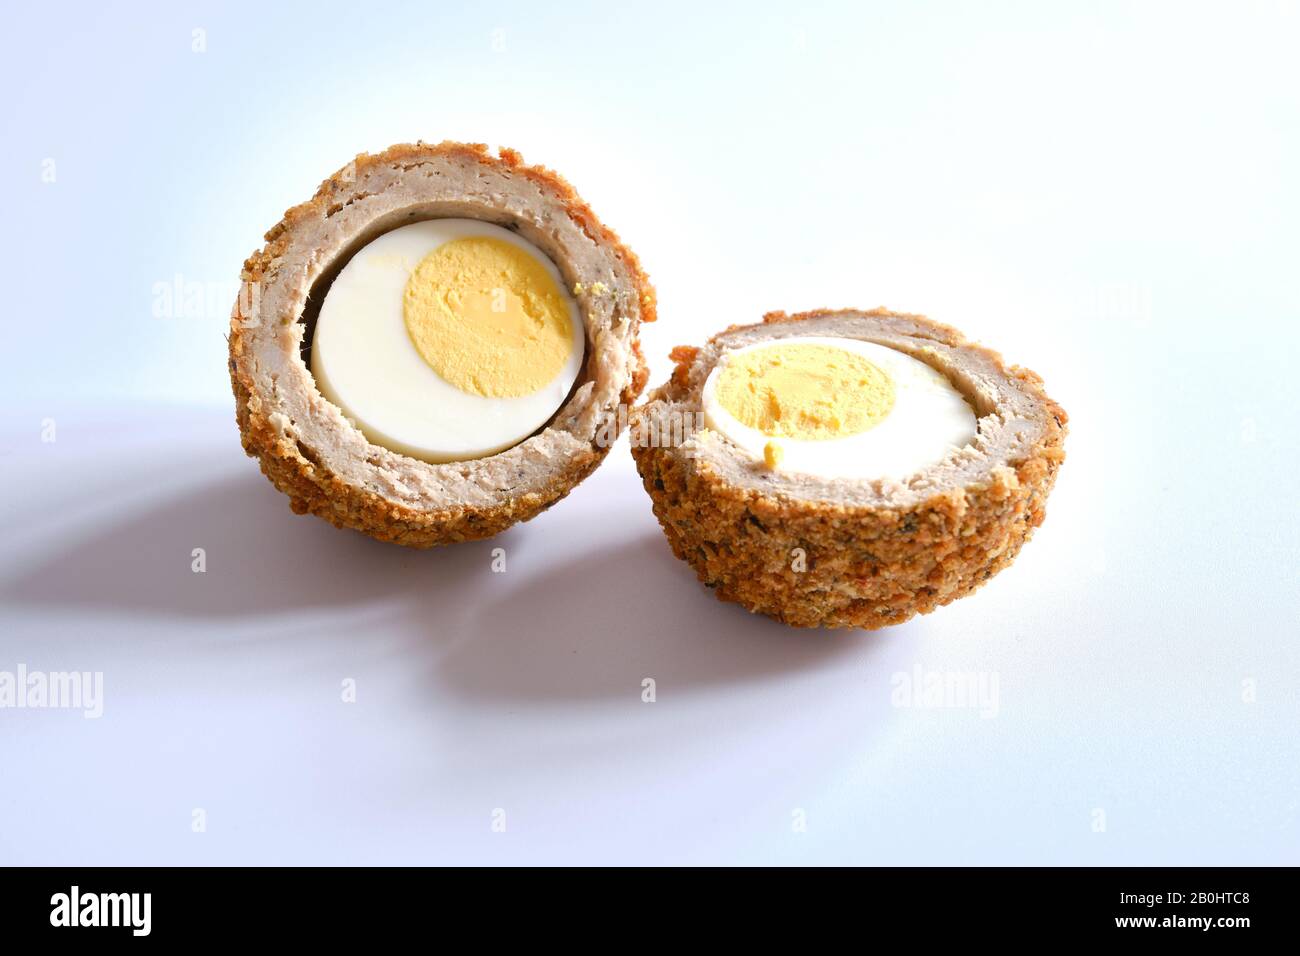 Scotch egg cut in half a traditional savoury snack consisting of a hard boiled egg surrounded by sausage meat and bread crumbs white background Stock Photo